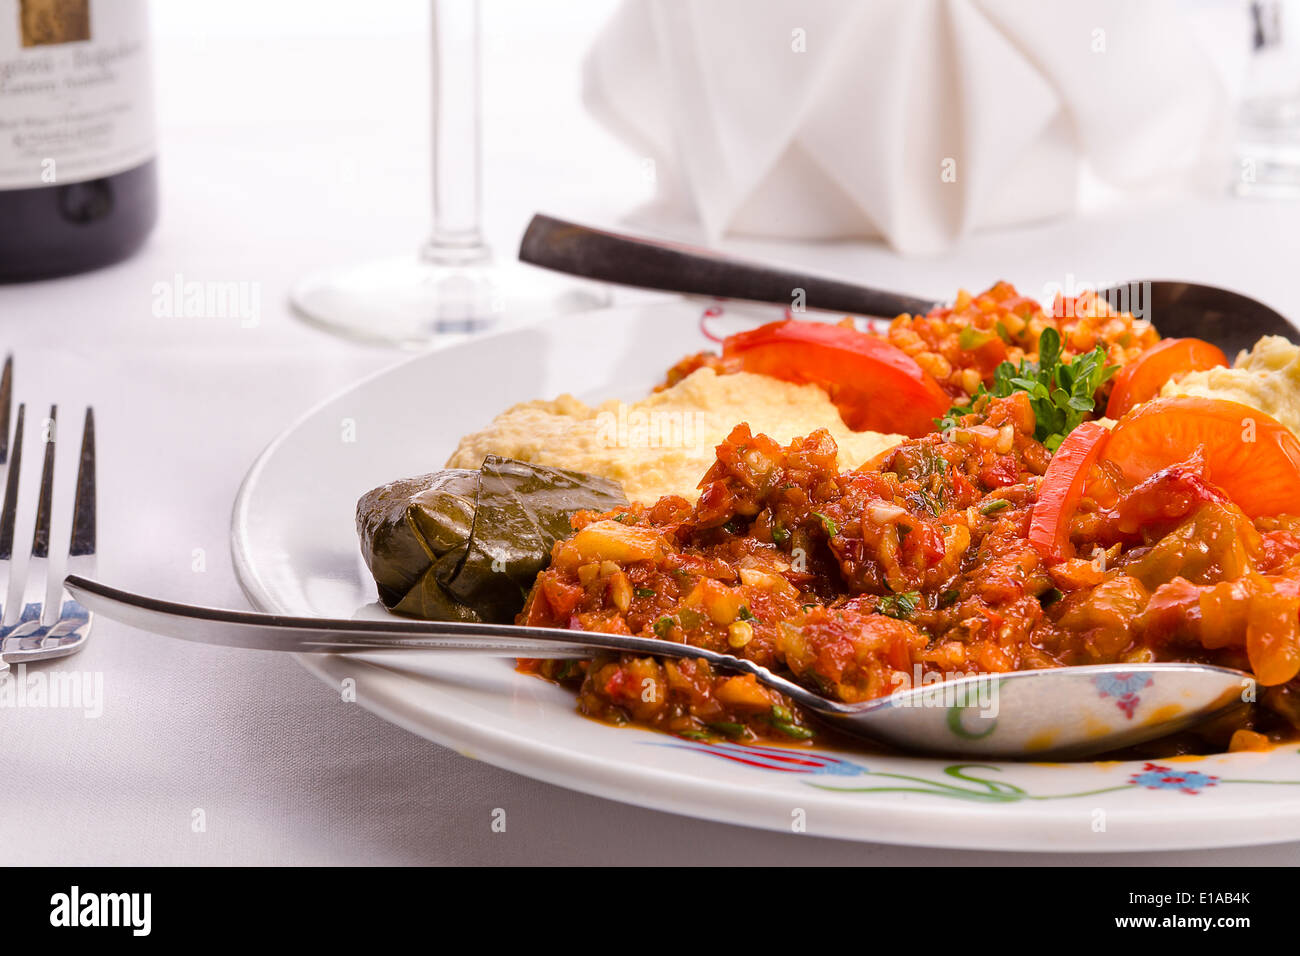 Appetizer sampler plate with Turkish ezme, hummus, babaganoush and dolma served with couple spoons Stock Photo